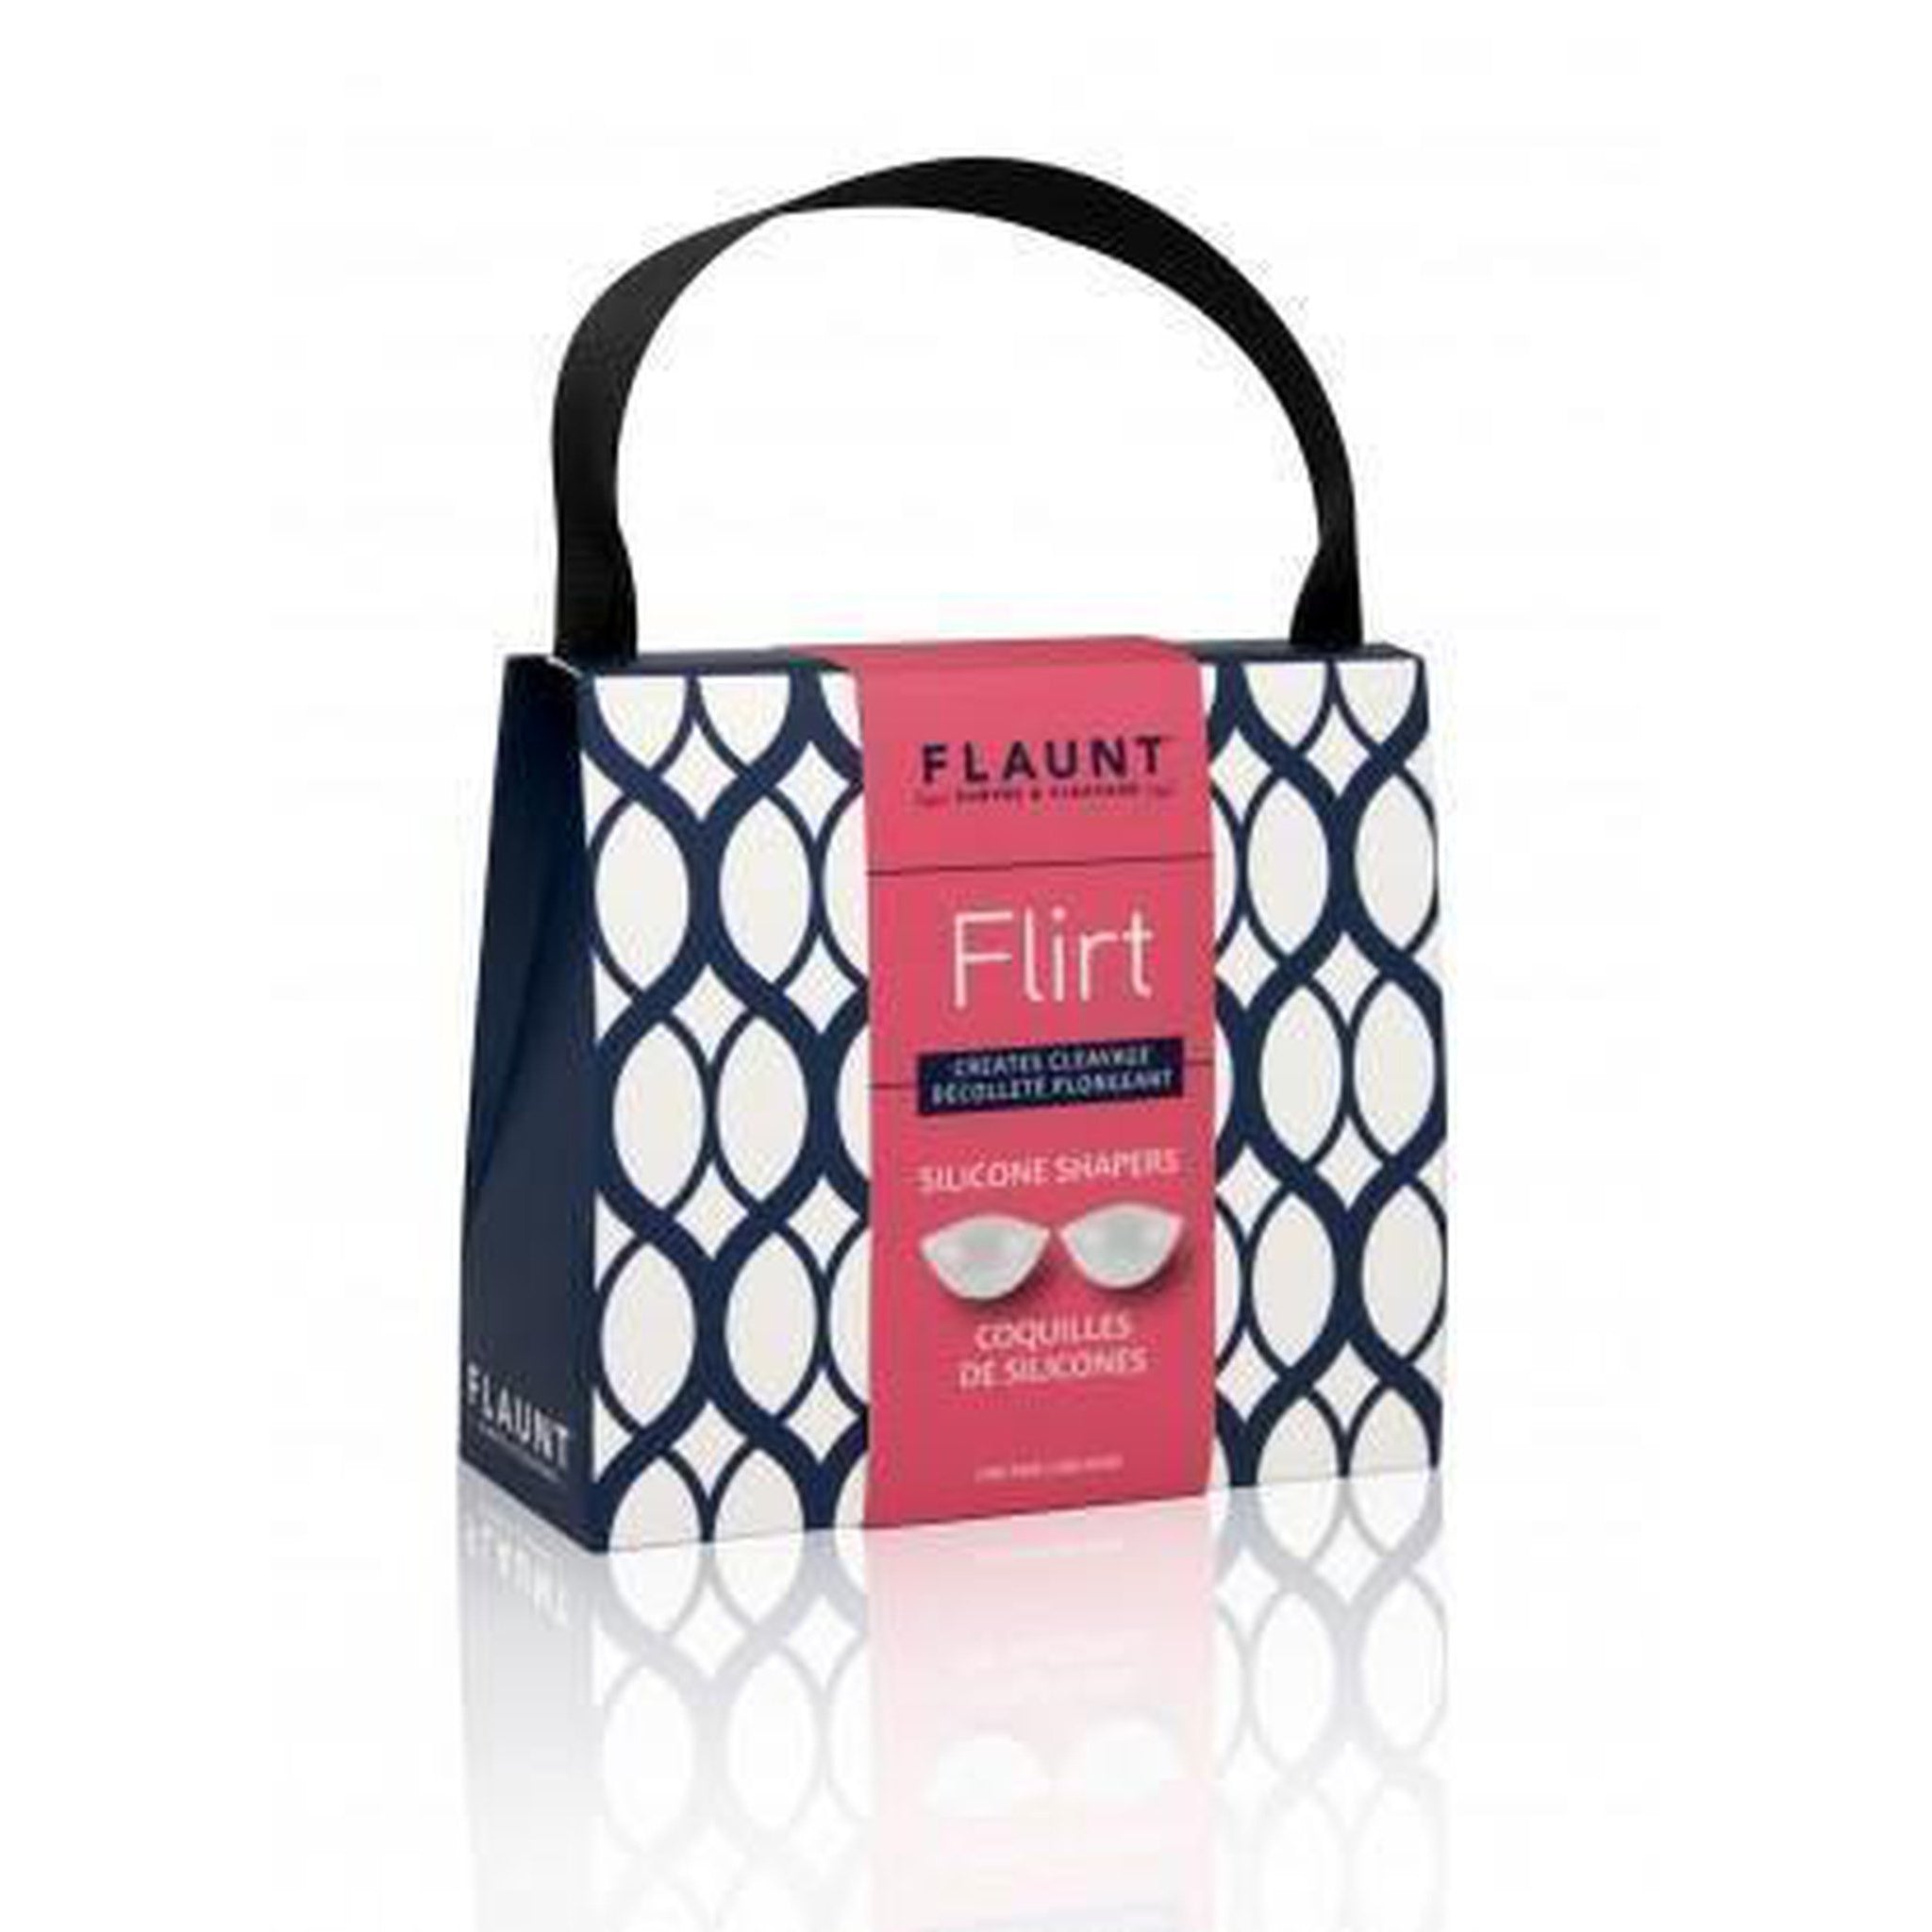 Fashion Essentials Flirt Push Up Cleavage Enhancers for instant lift and volume